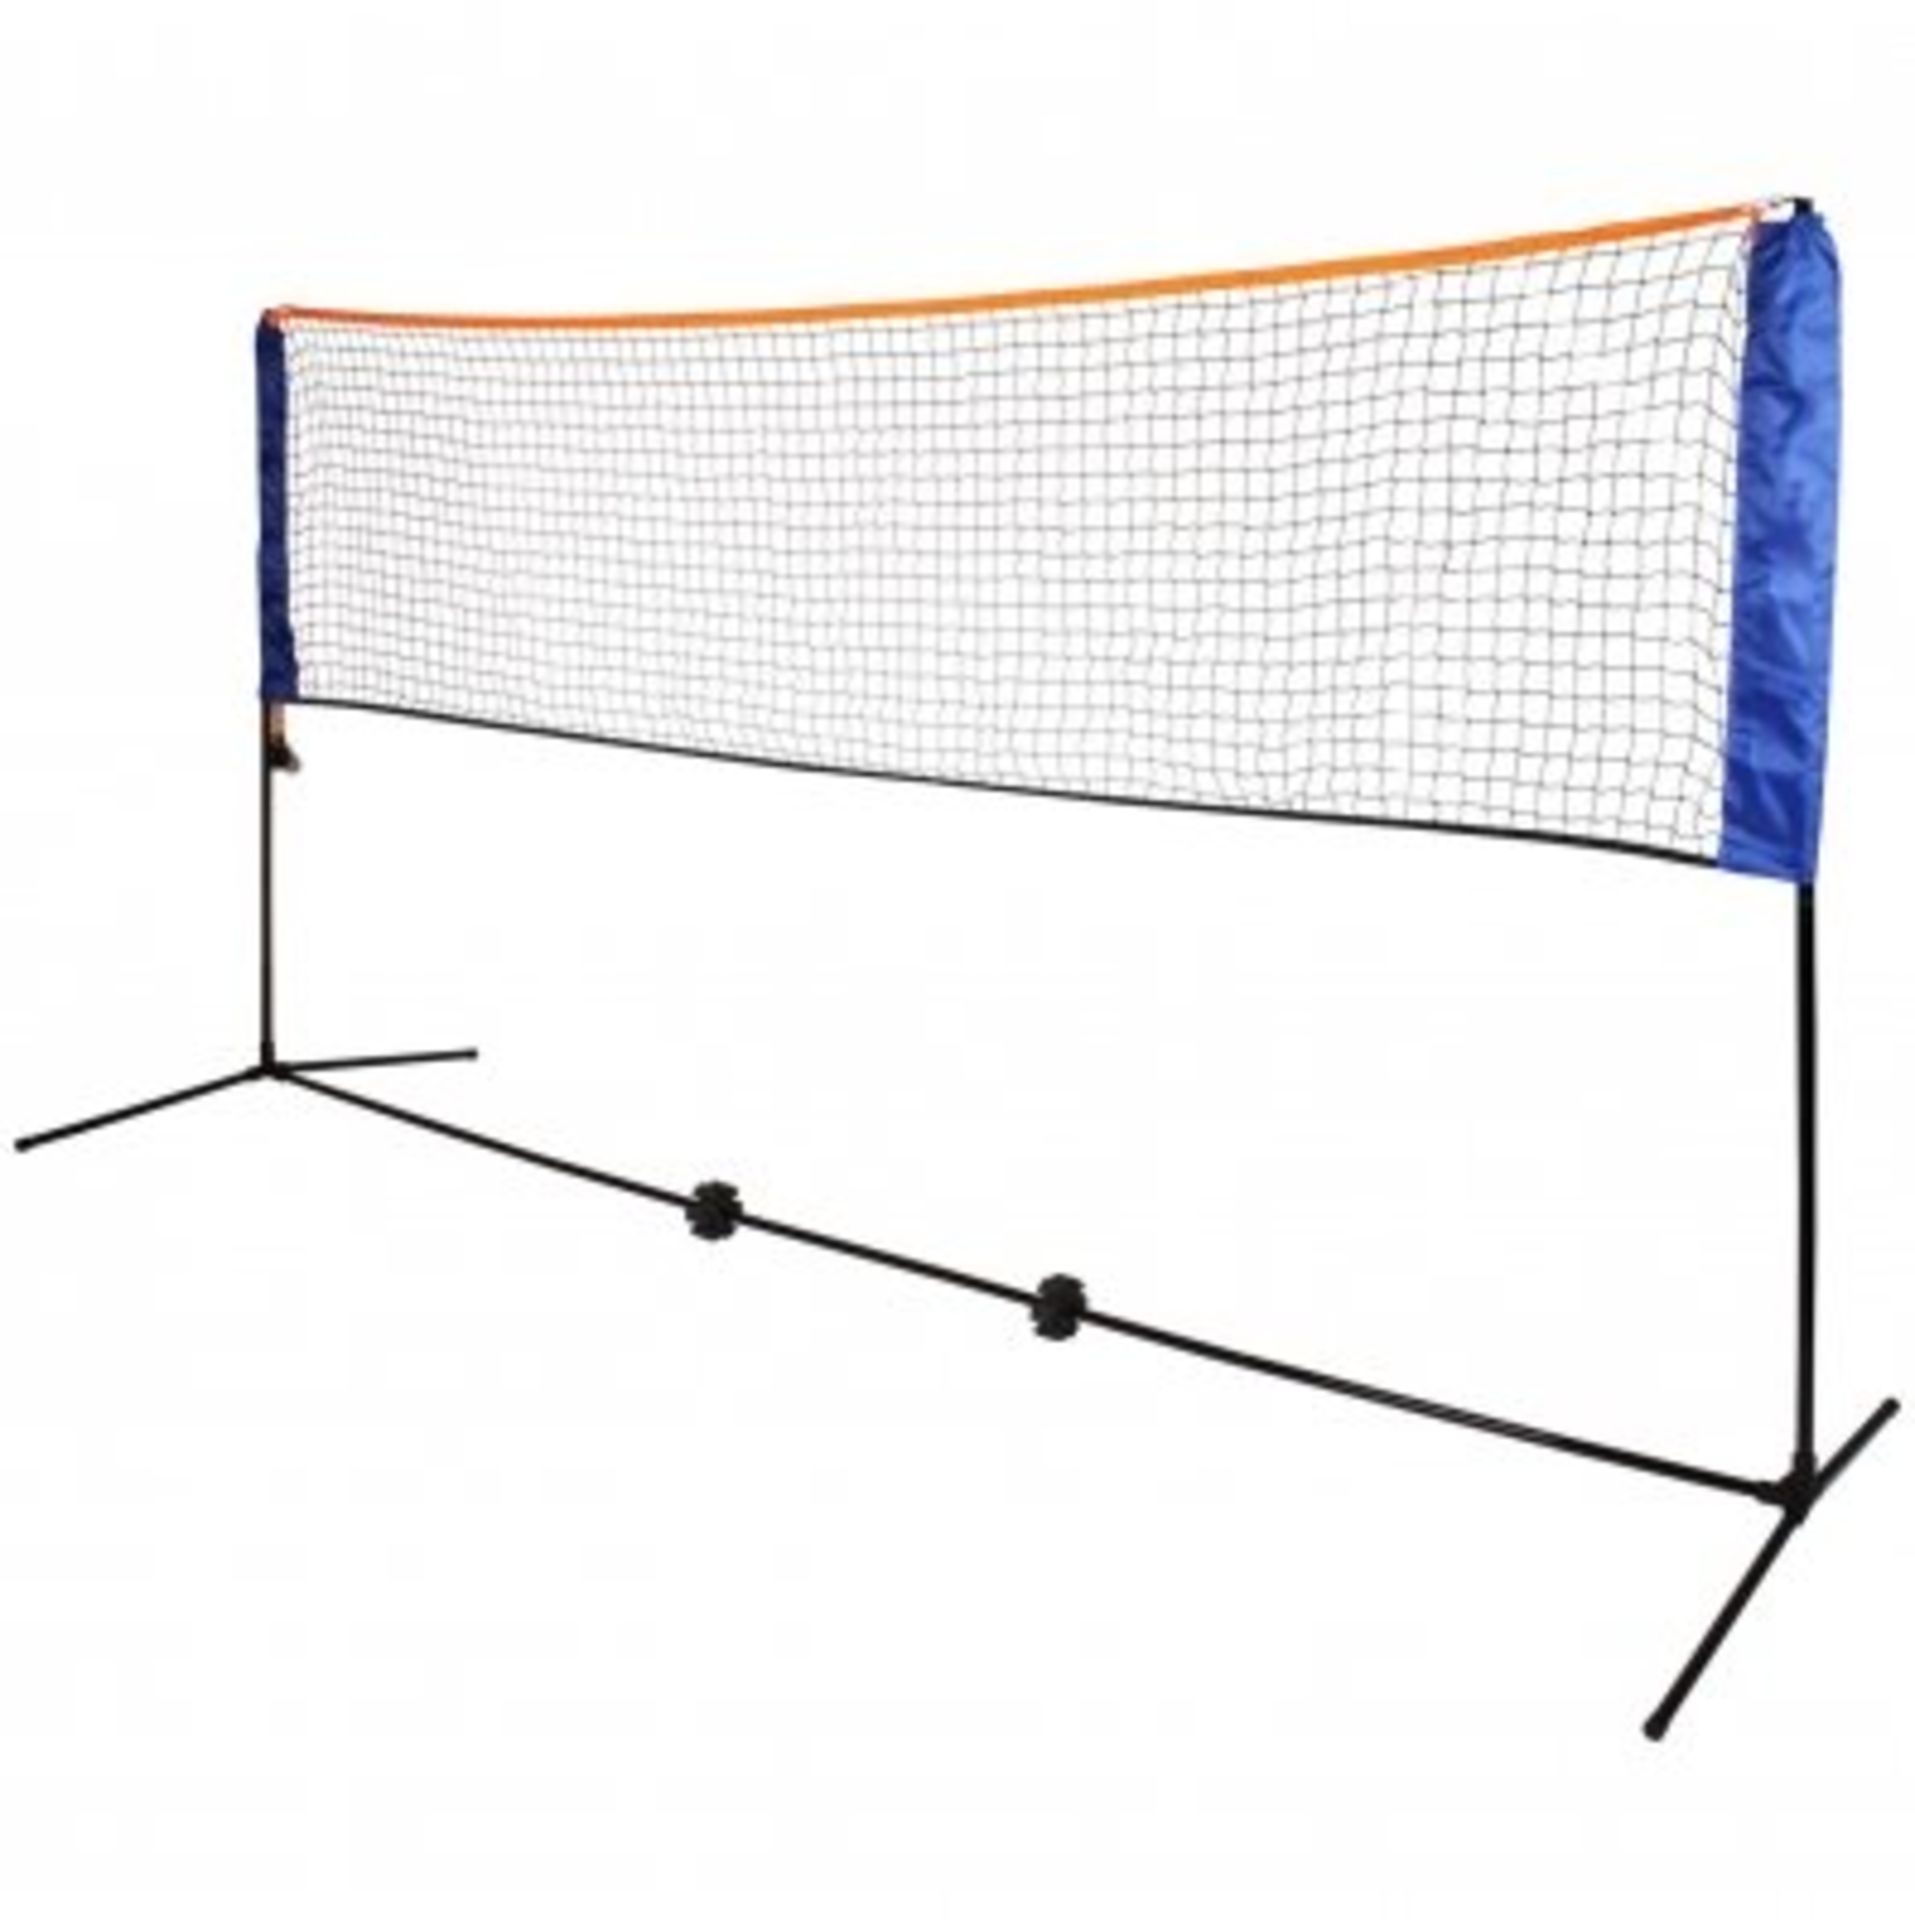 (RU252) Large Multi-Purpose fully adjustable net set. The posts are able to reach 155cm fo...